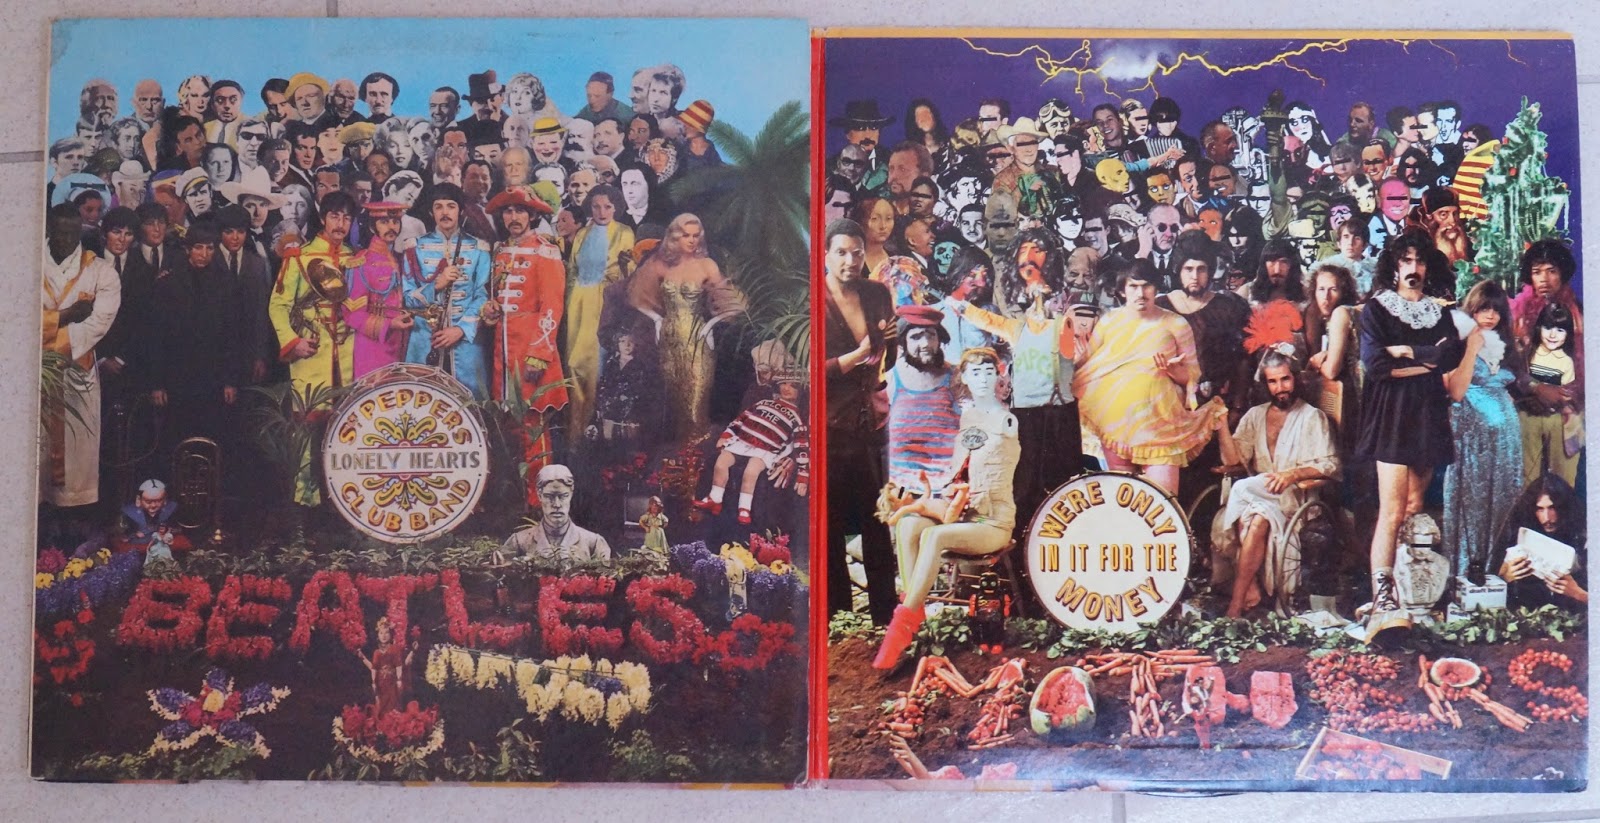 Duke S Wax Platter Patter Sgt Pepper S Lonely Hearts Club Band Vs We Re Only In It For The Money